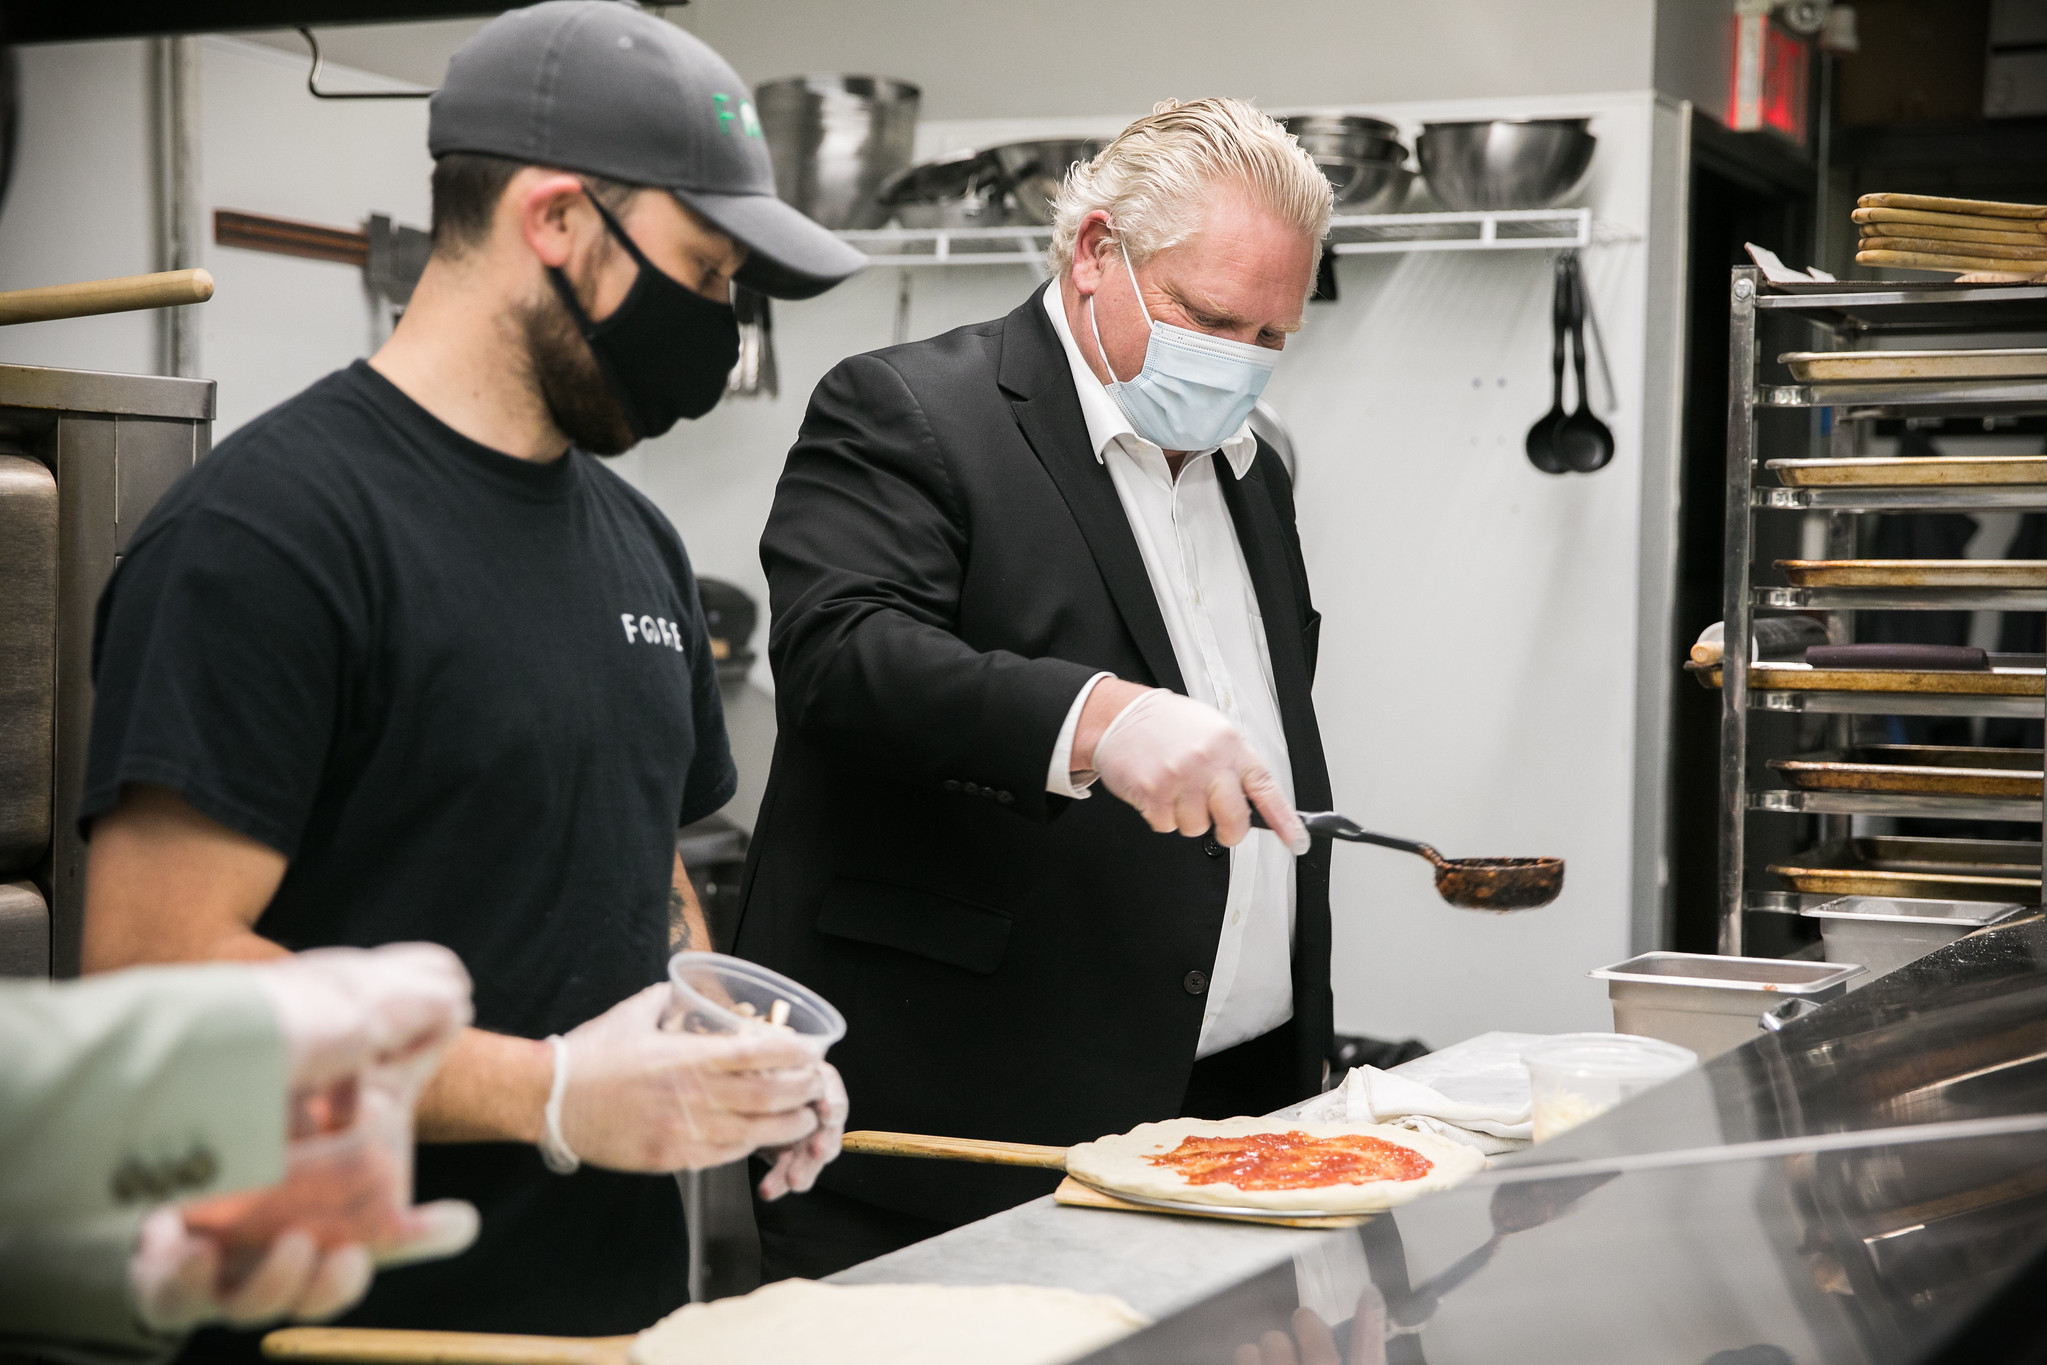 Premier gets a lesson in pizza making from a restaurant worker